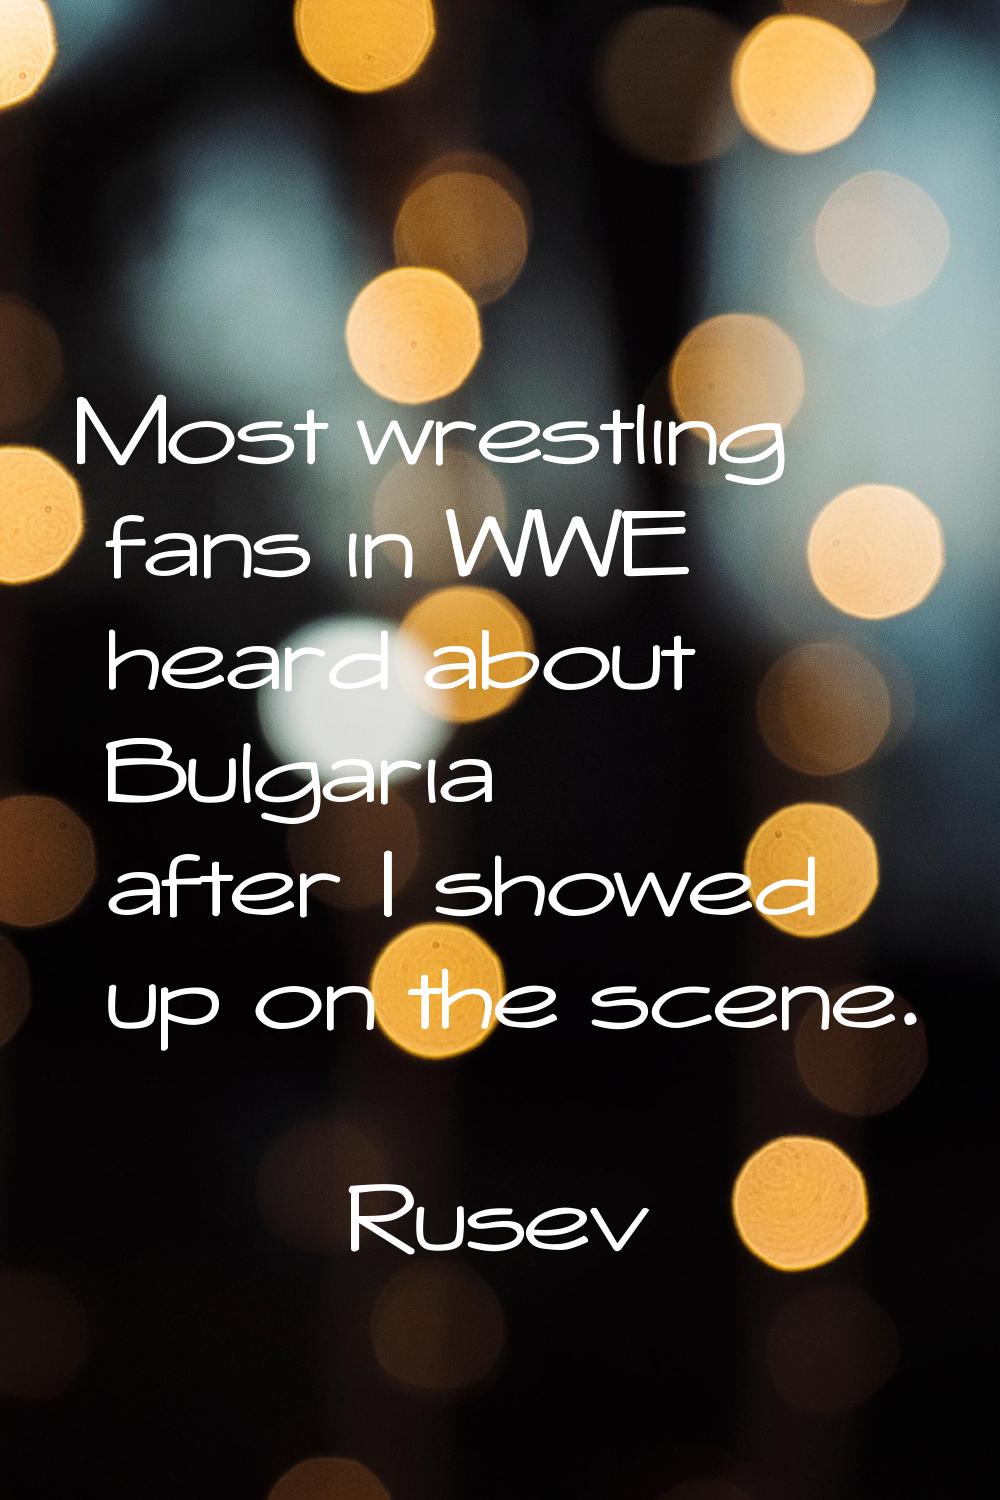 Most wrestling fans in WWE heard about Bulgaria after I showed up on the scene.